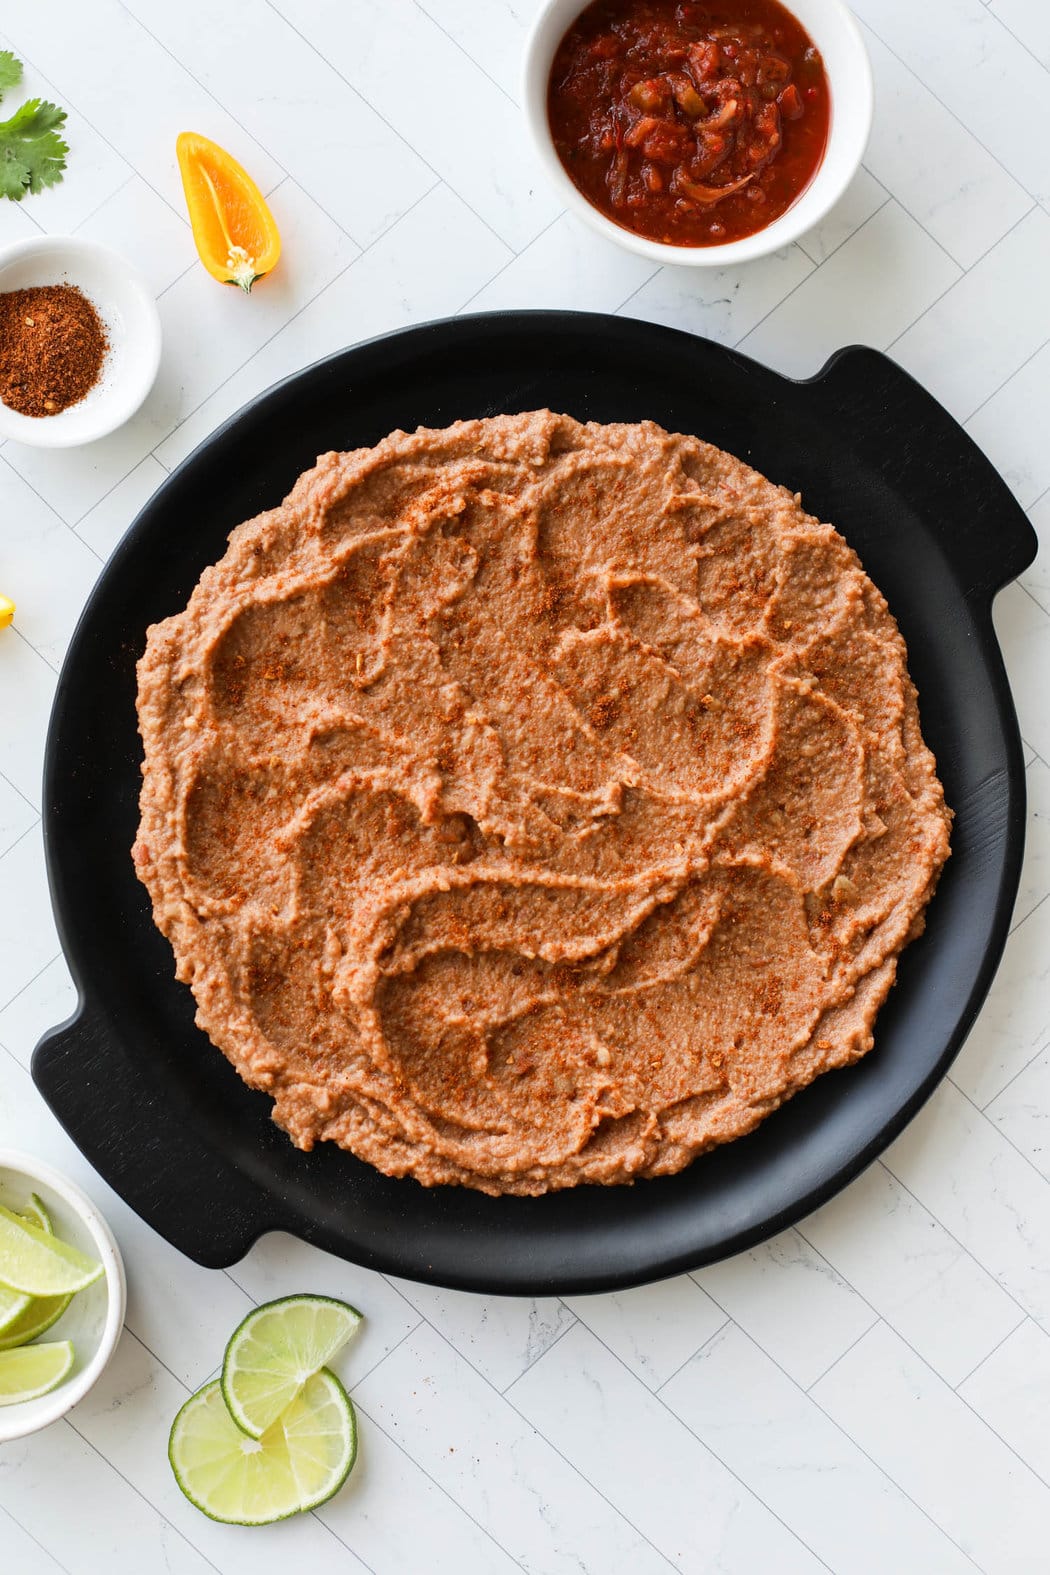 Black platter with refried beans spread on circle for bottom layer of 7 layer dip.